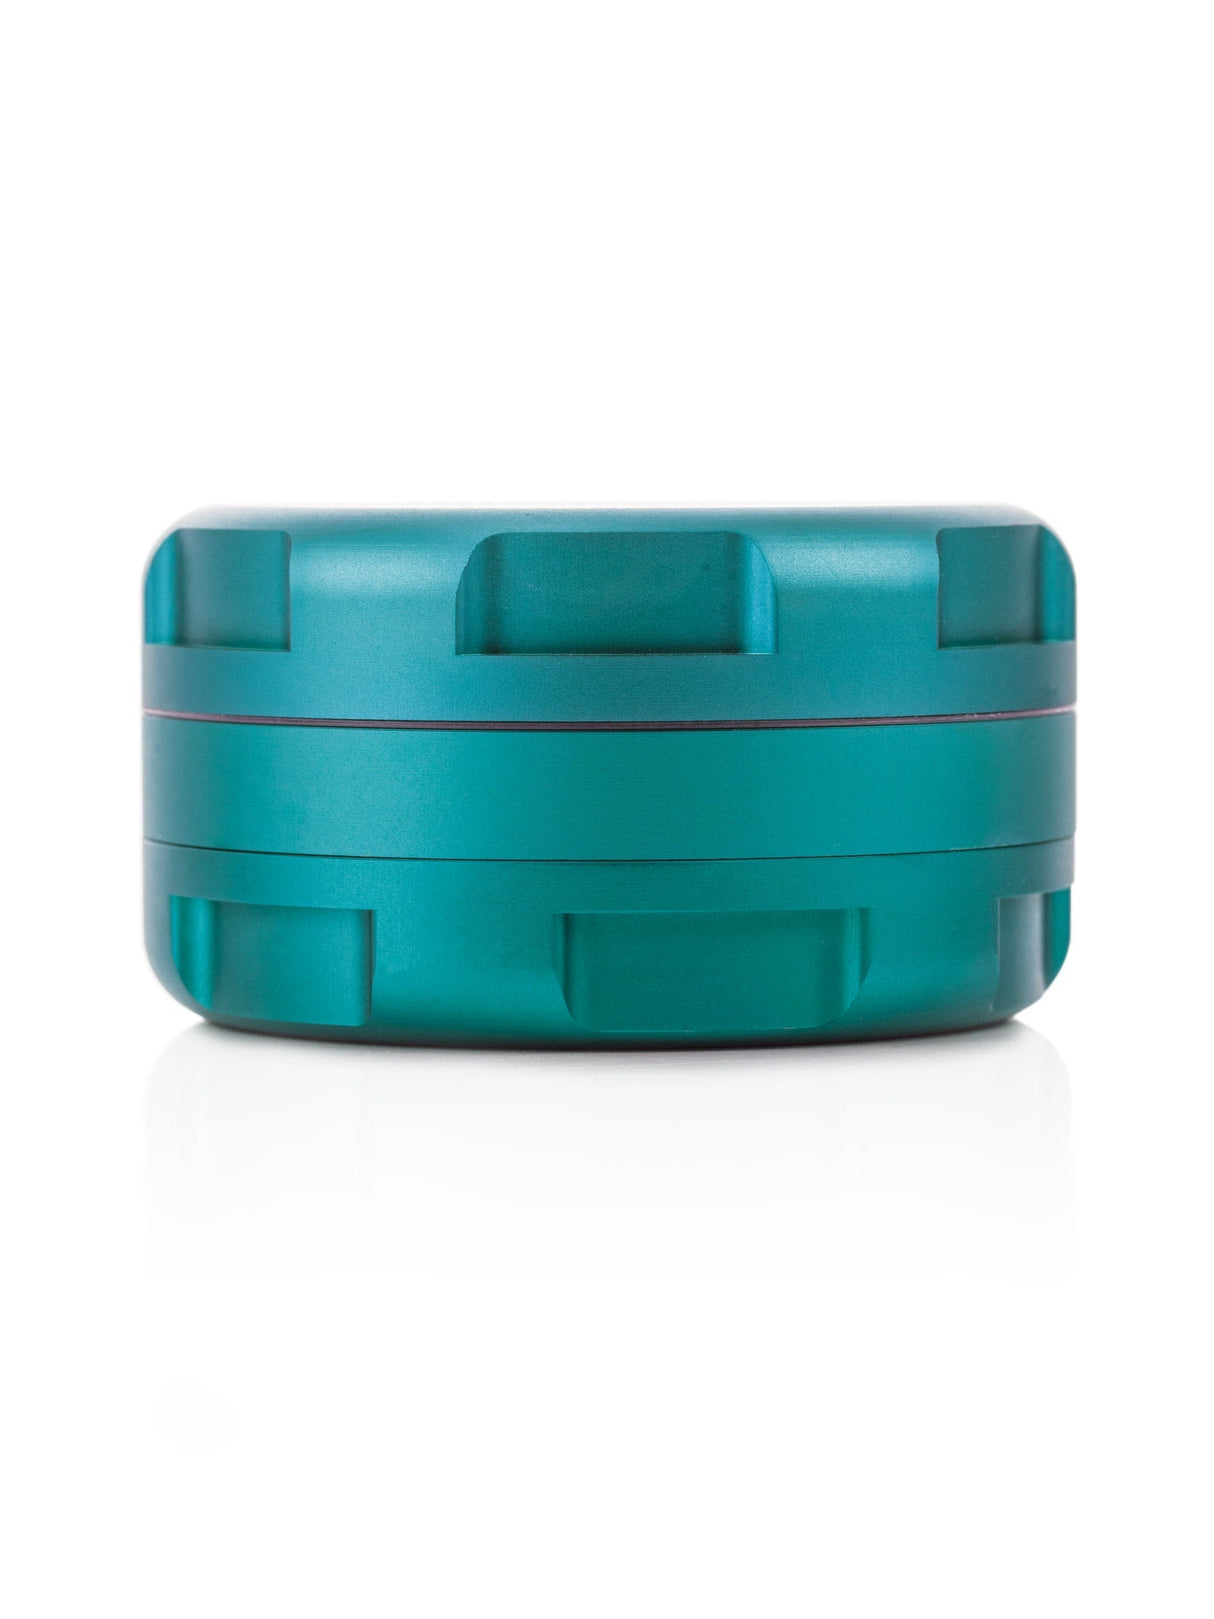 GRAV 3 Piece Grinder in Teal, Compact Aluminum Design, Front View on White Background